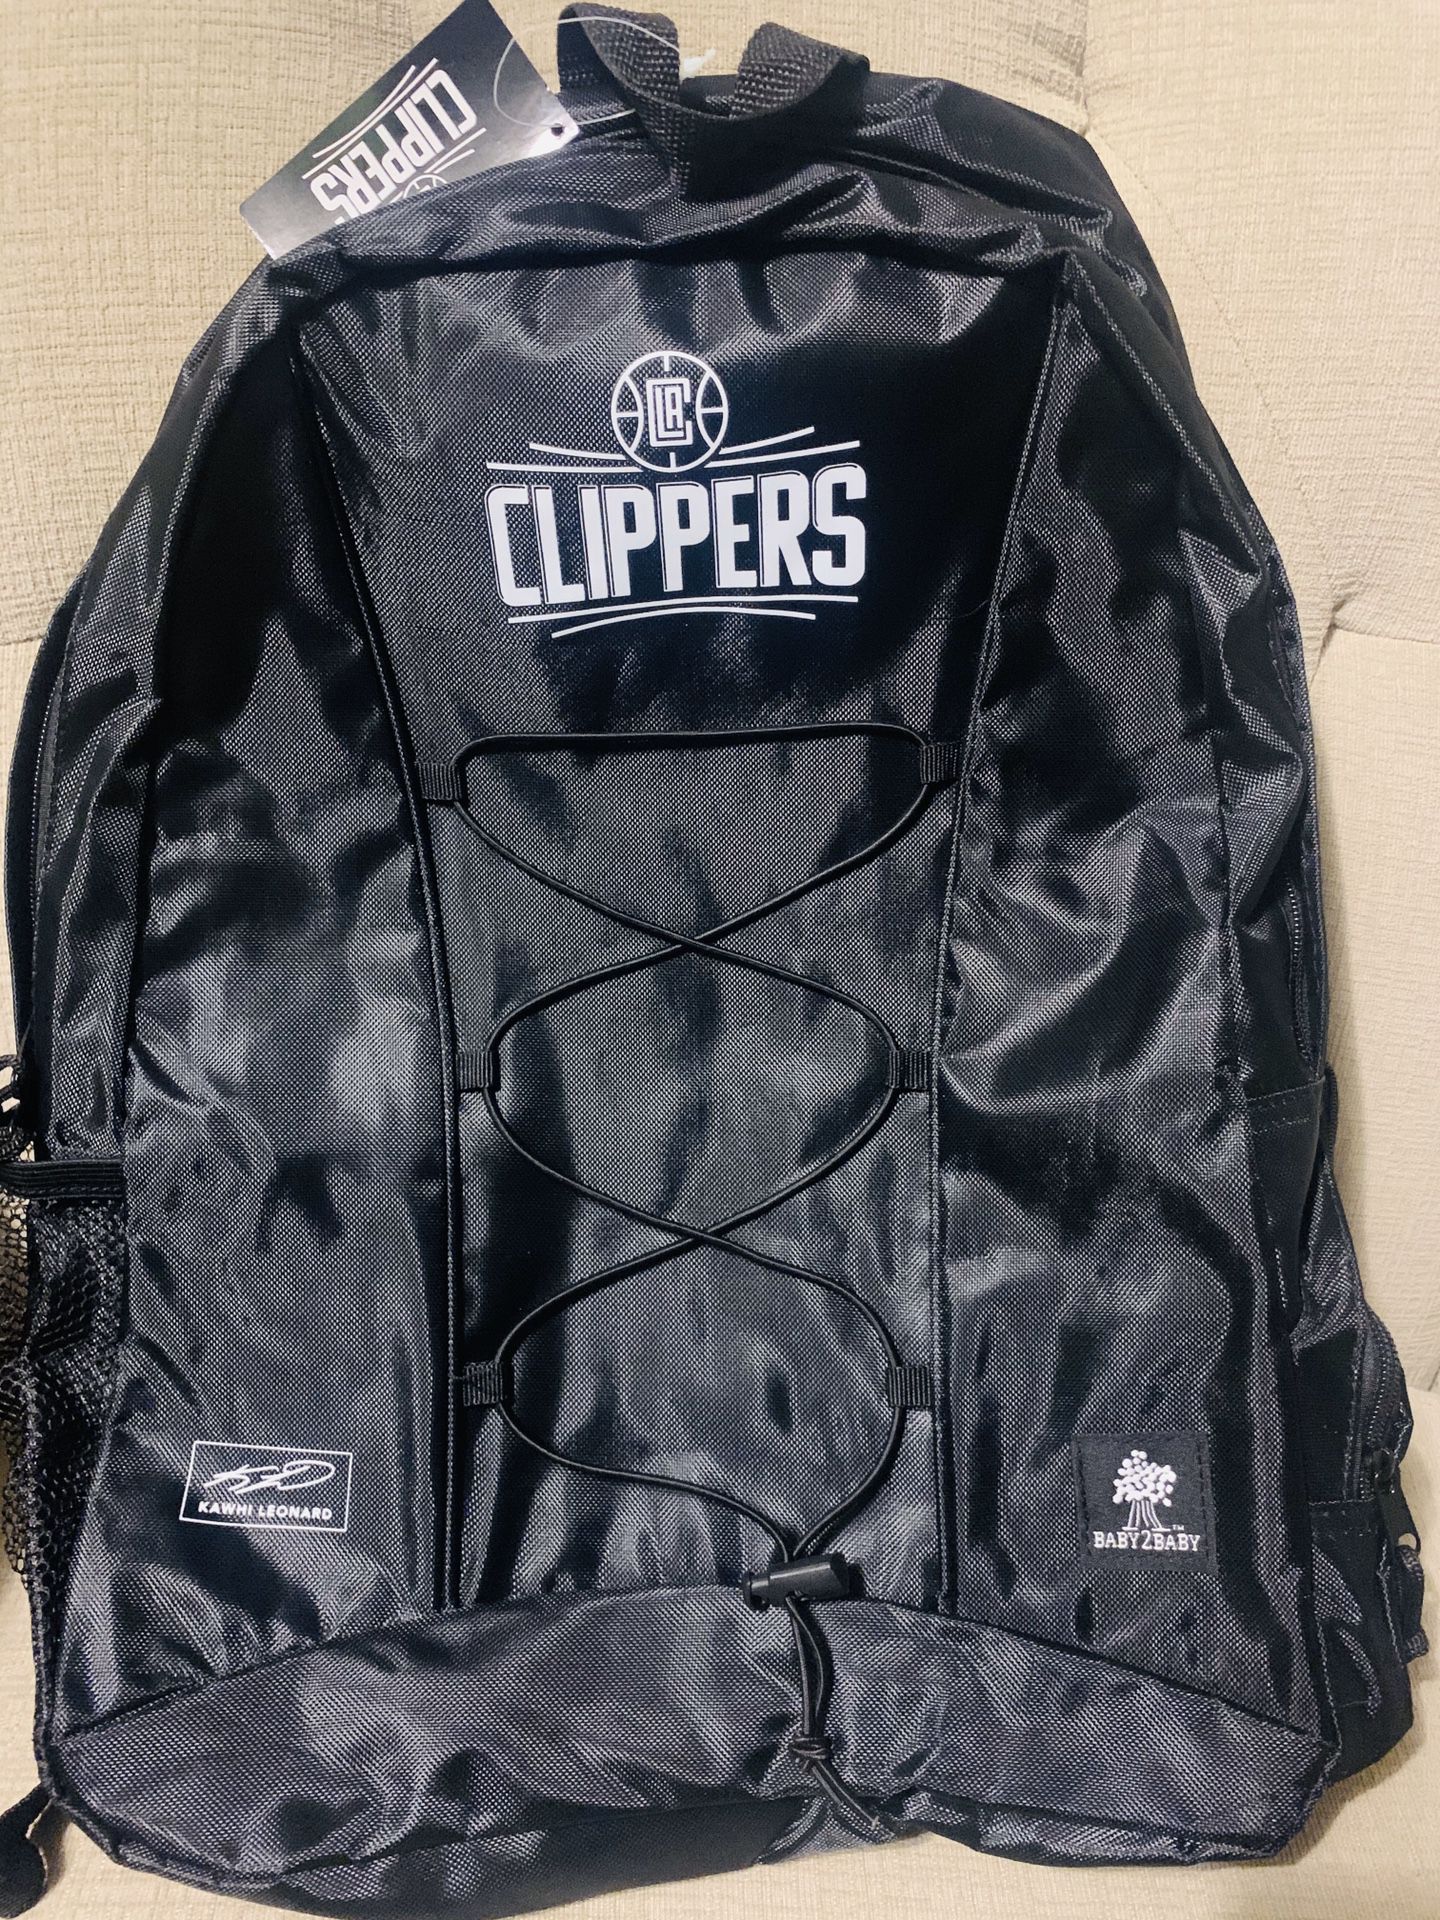 Clipper’s backpack